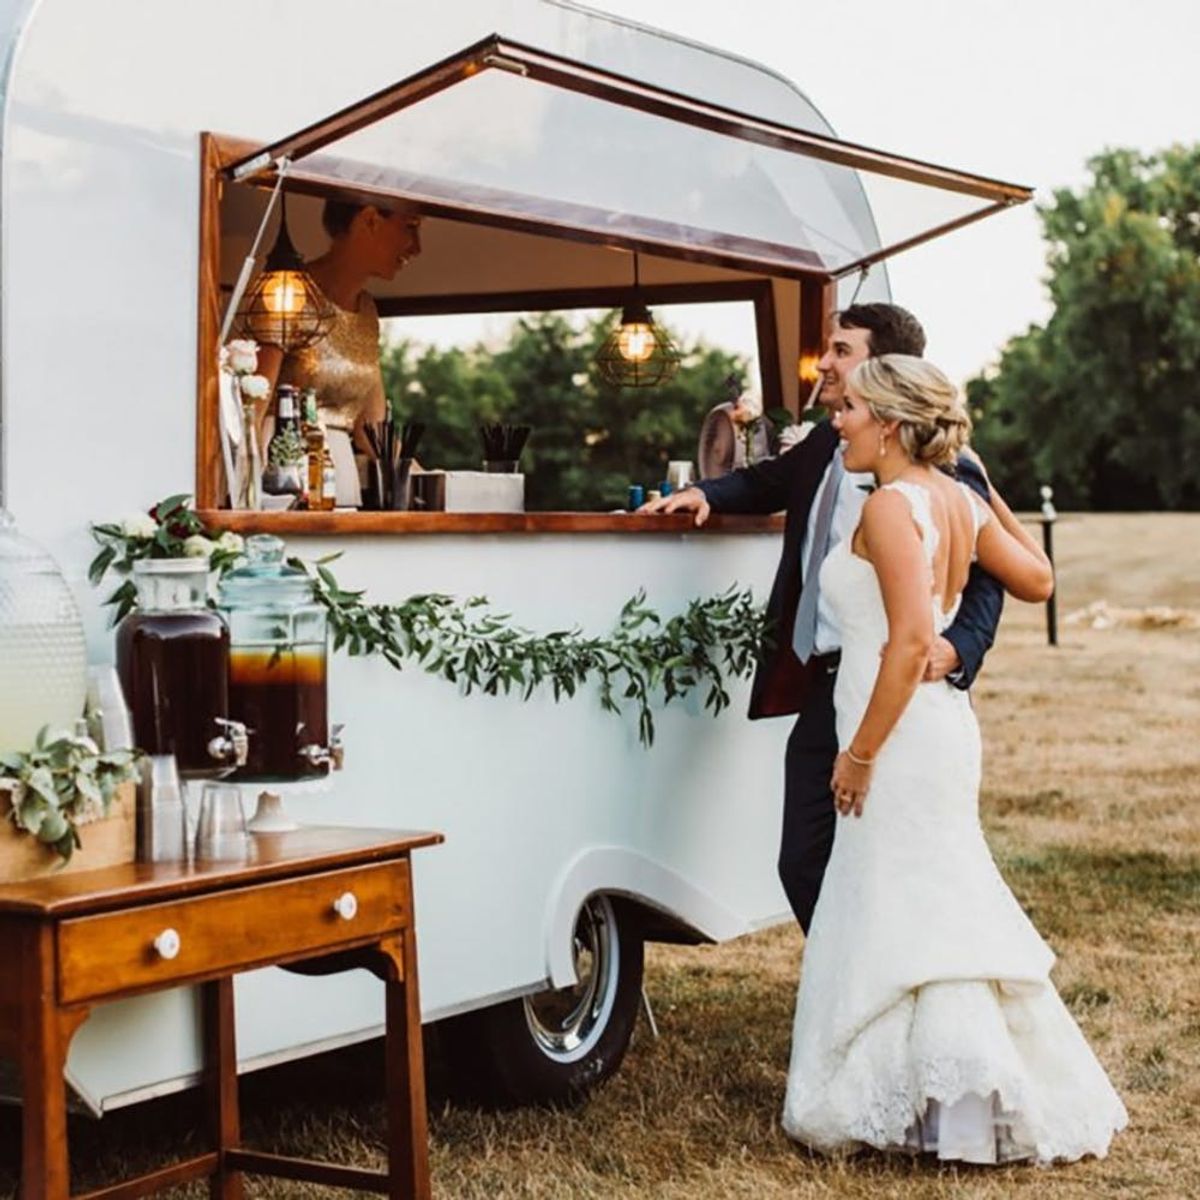 Mobile Bars Are the Latest Wedding Trend You Need Get On Board With